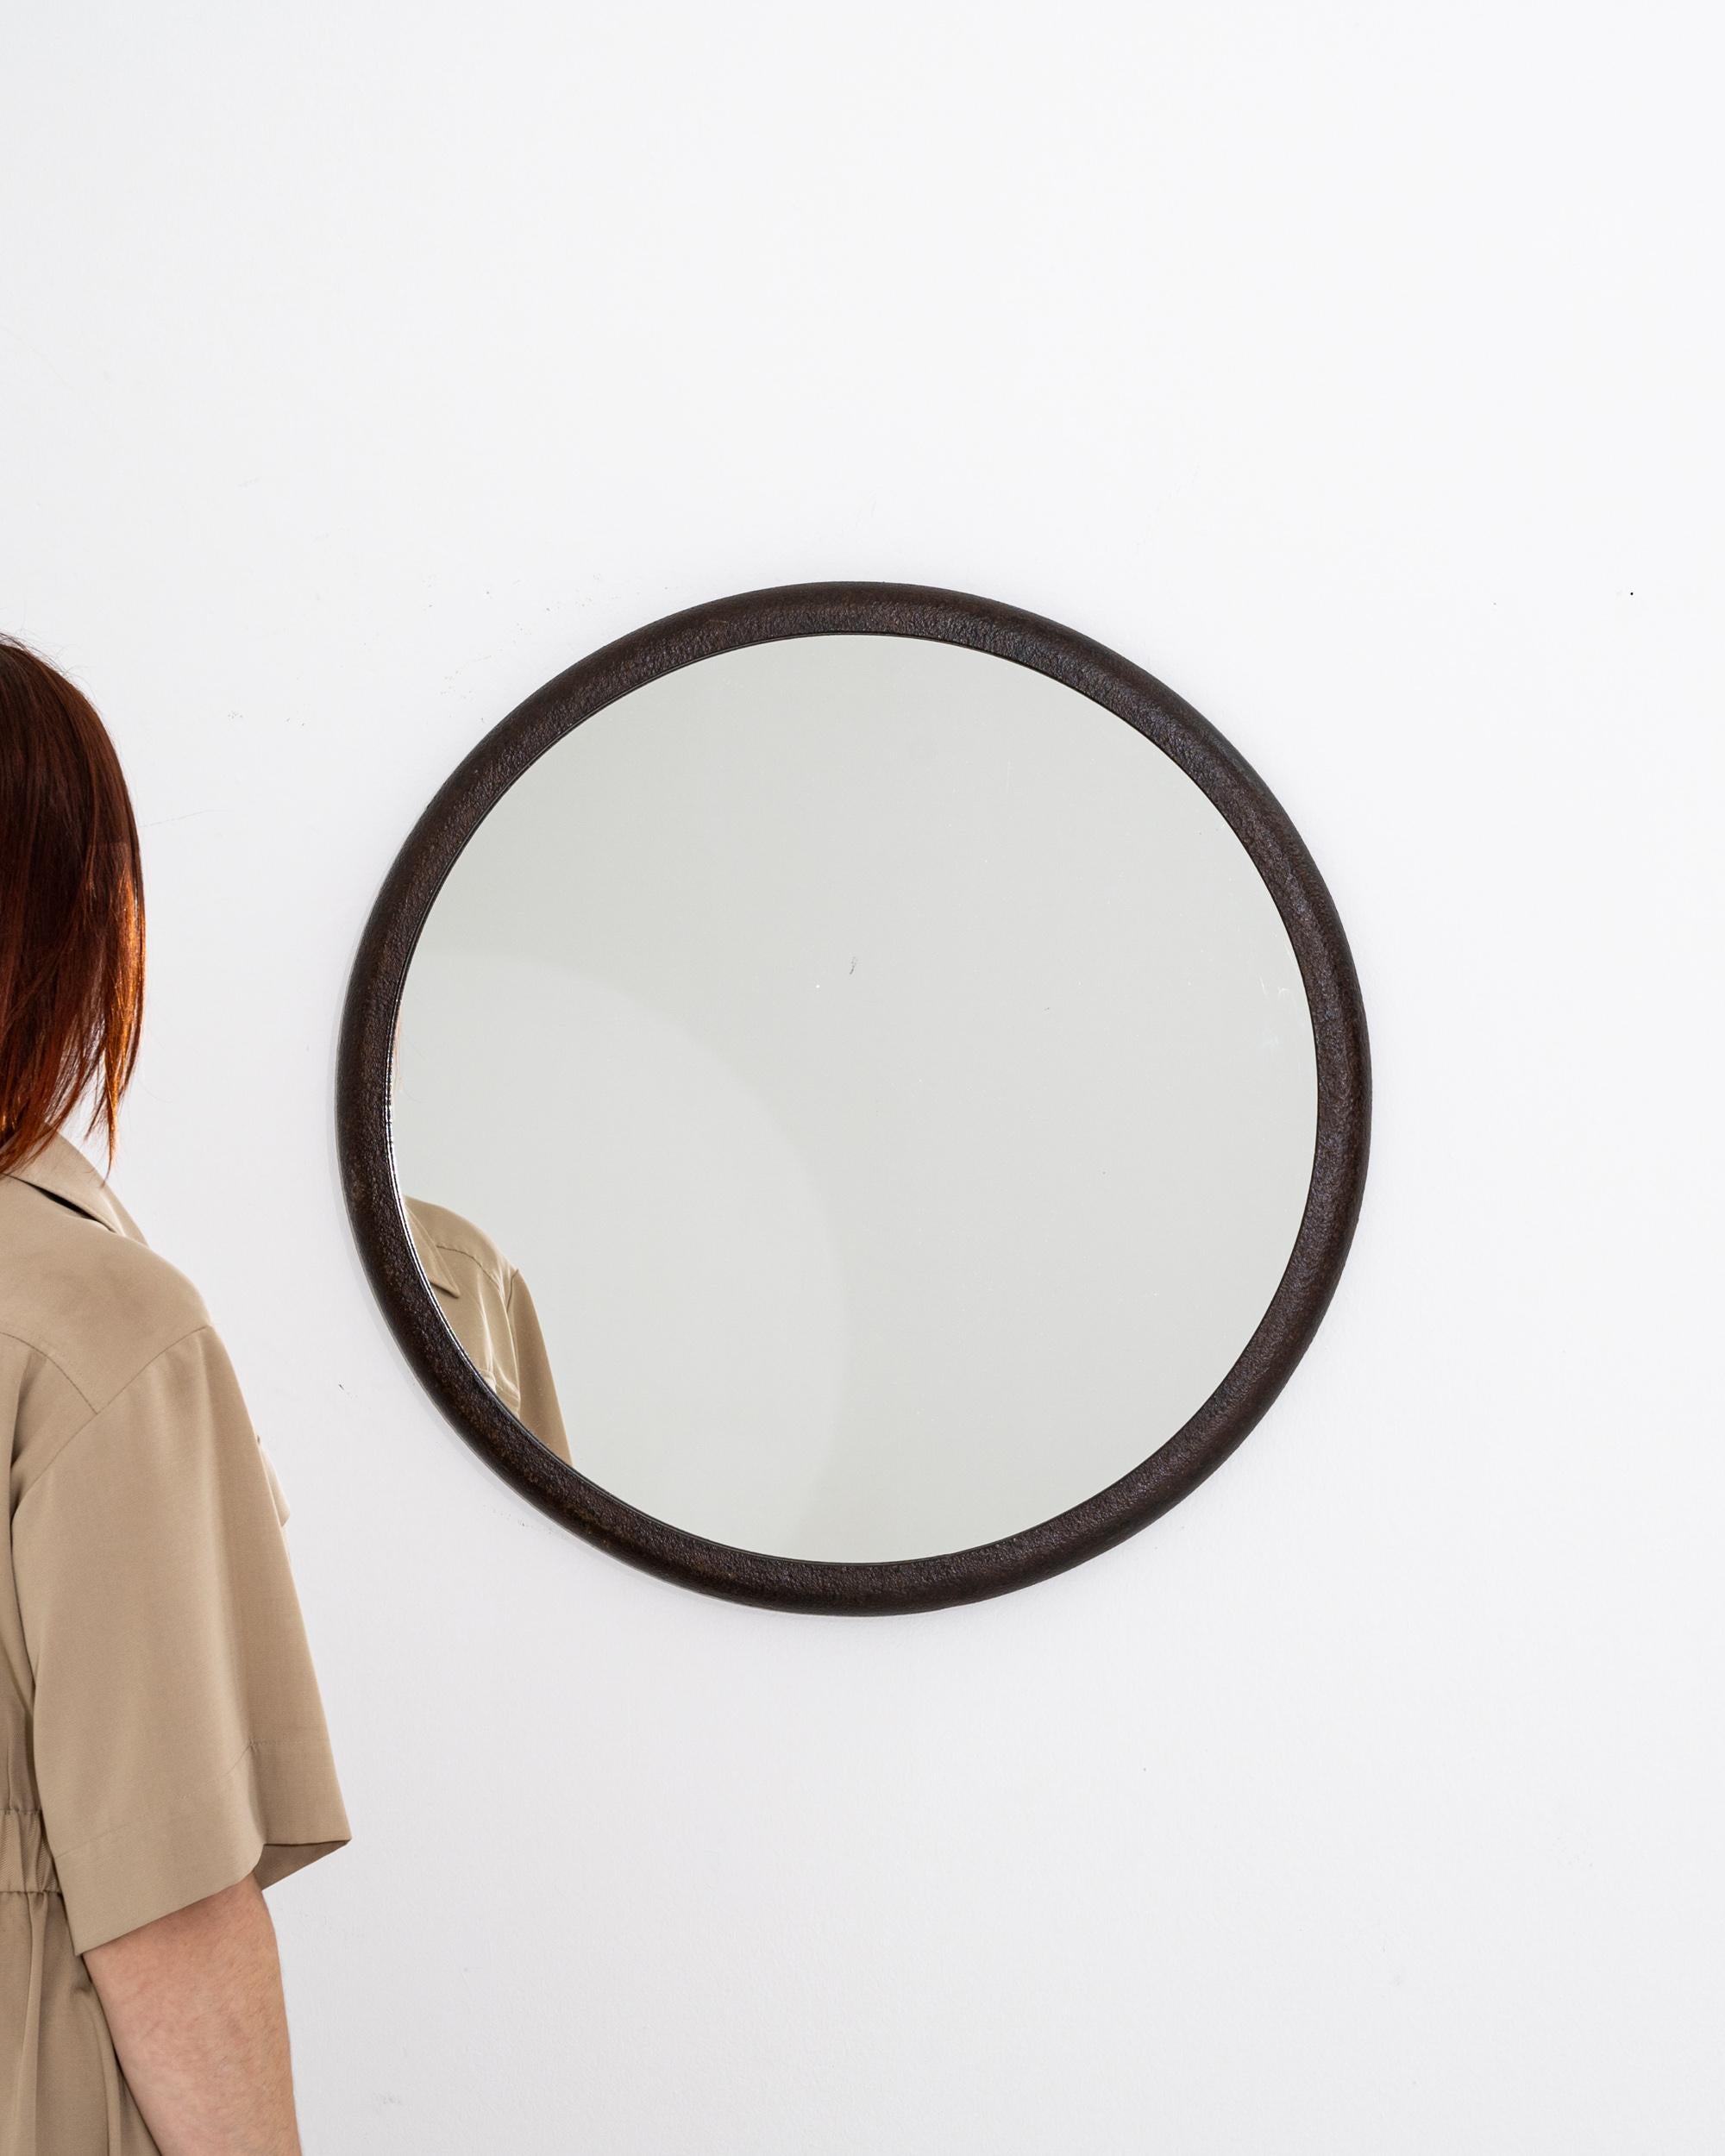 A polish iron mirror created in the 1950s. Simple yet elegant, this circular mirror offers unique Industrial charm. Its frame, a weathered and patinated metal ring adds a compelling grit to the materiality of the piece, standing in pleasing contrast